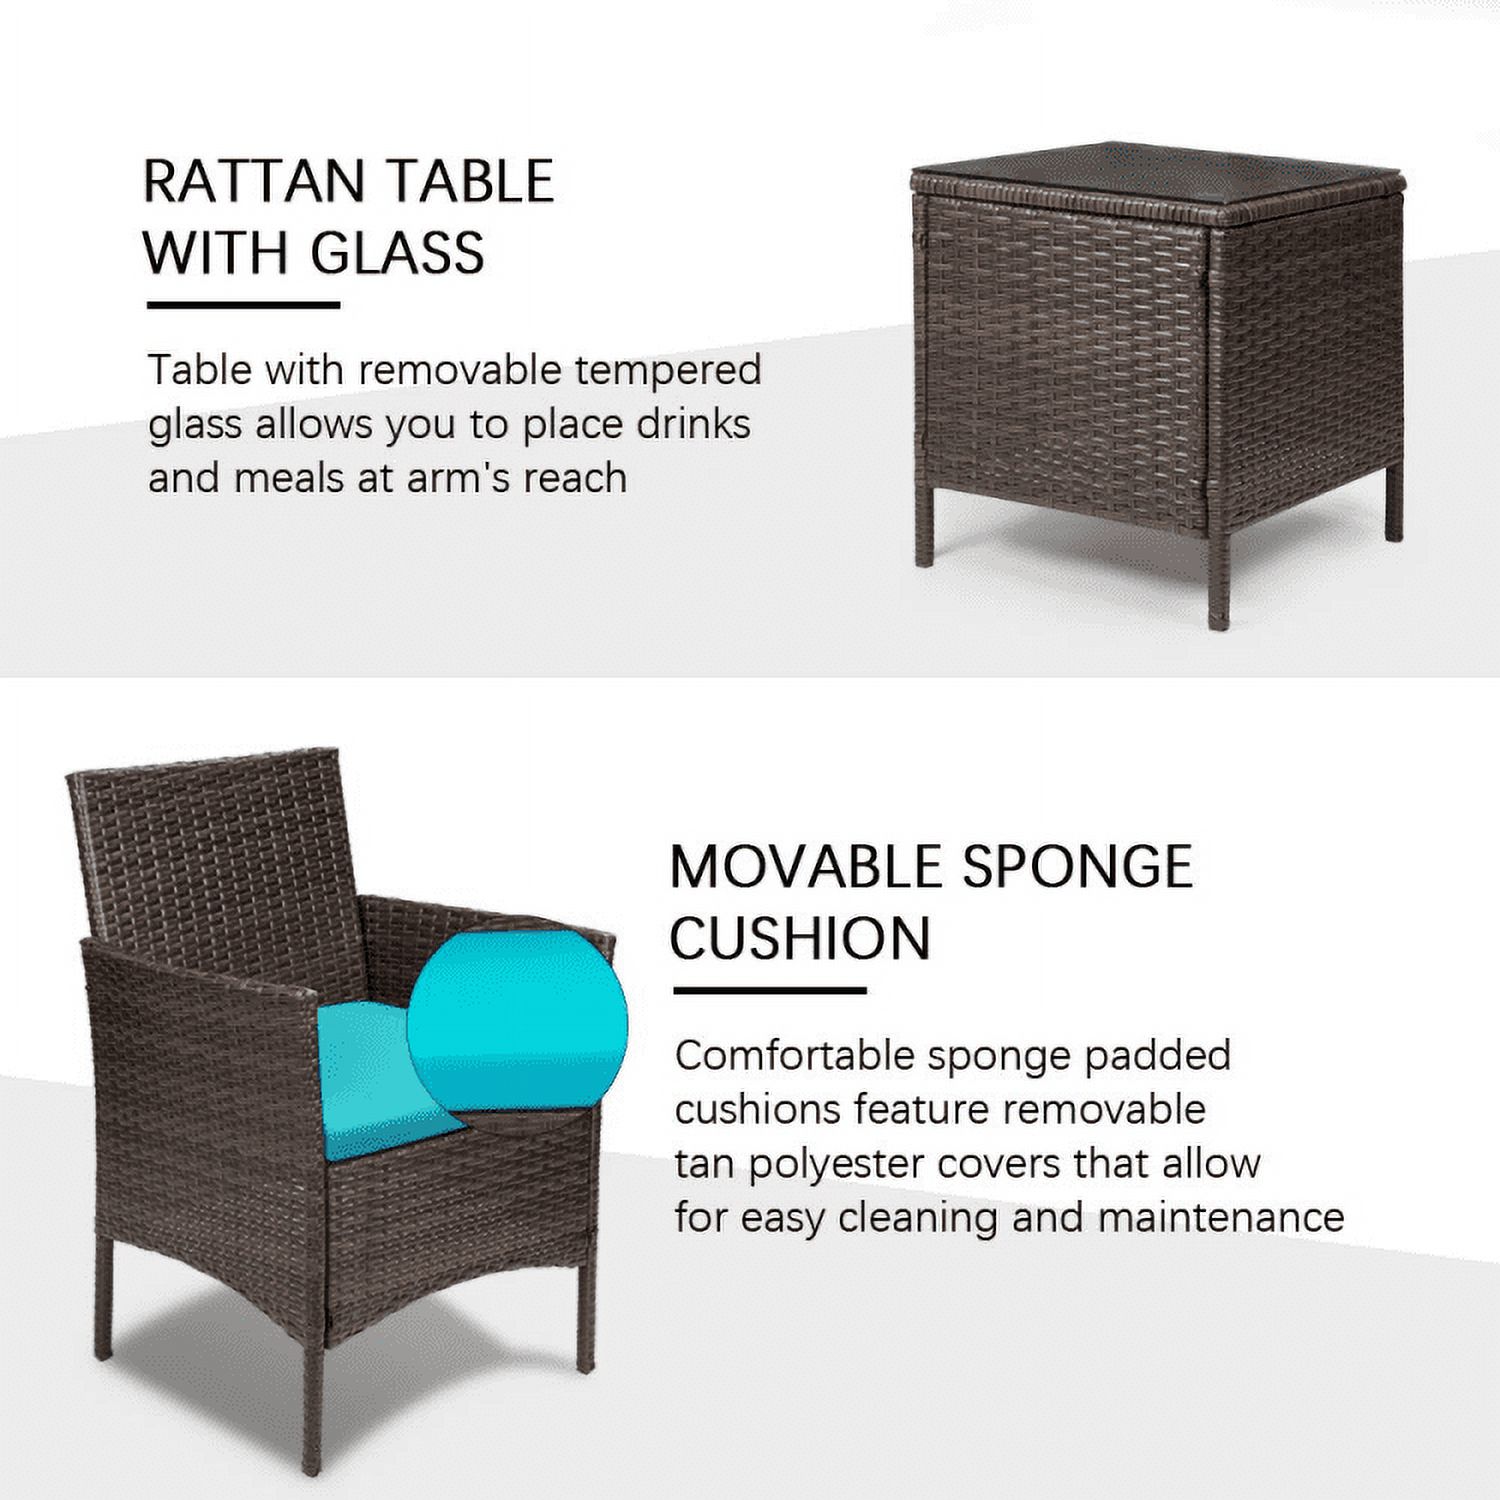 Lacoo 3 Pieces Outdoor Patio Furniture PE Rattan Wicker Table and Chairs Set Bar Set with Cushioned Tempered Glass (Brown / Blue) - image 3 of 7